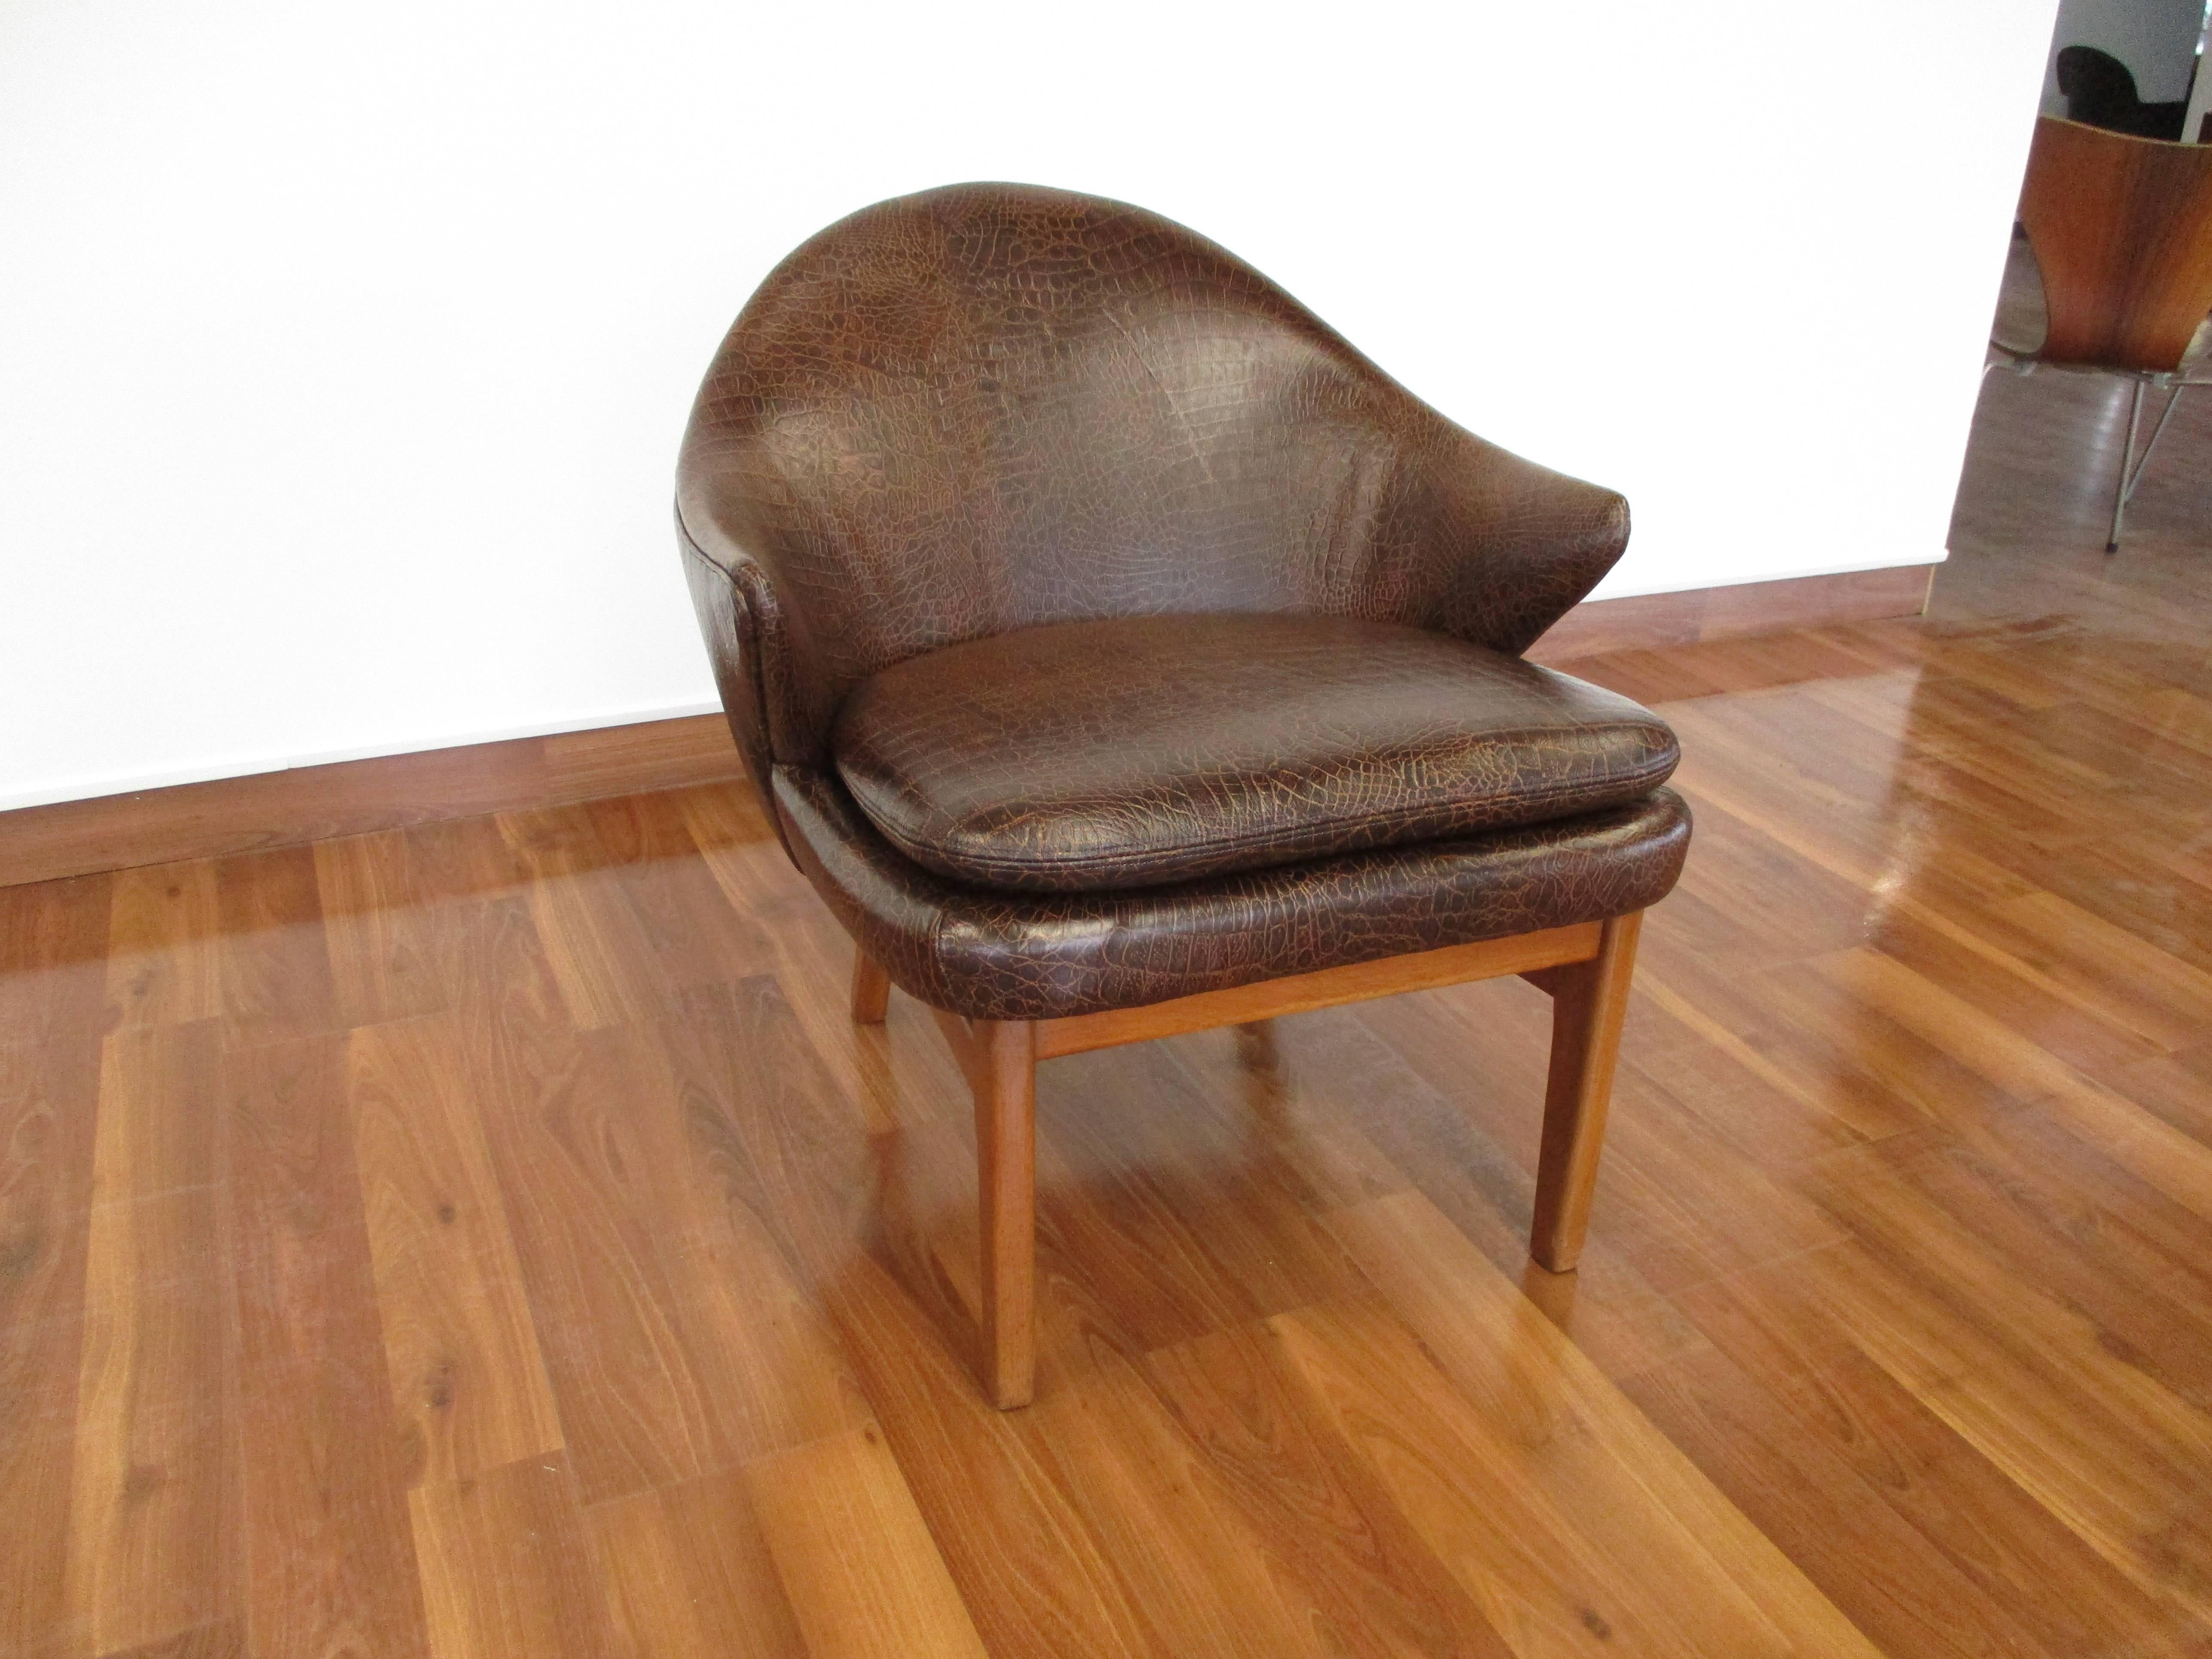 Elegant Kurt Olsen Armchair in Teak and Alligator Print Leather In Excellent Condition For Sale In Ottawa, ON